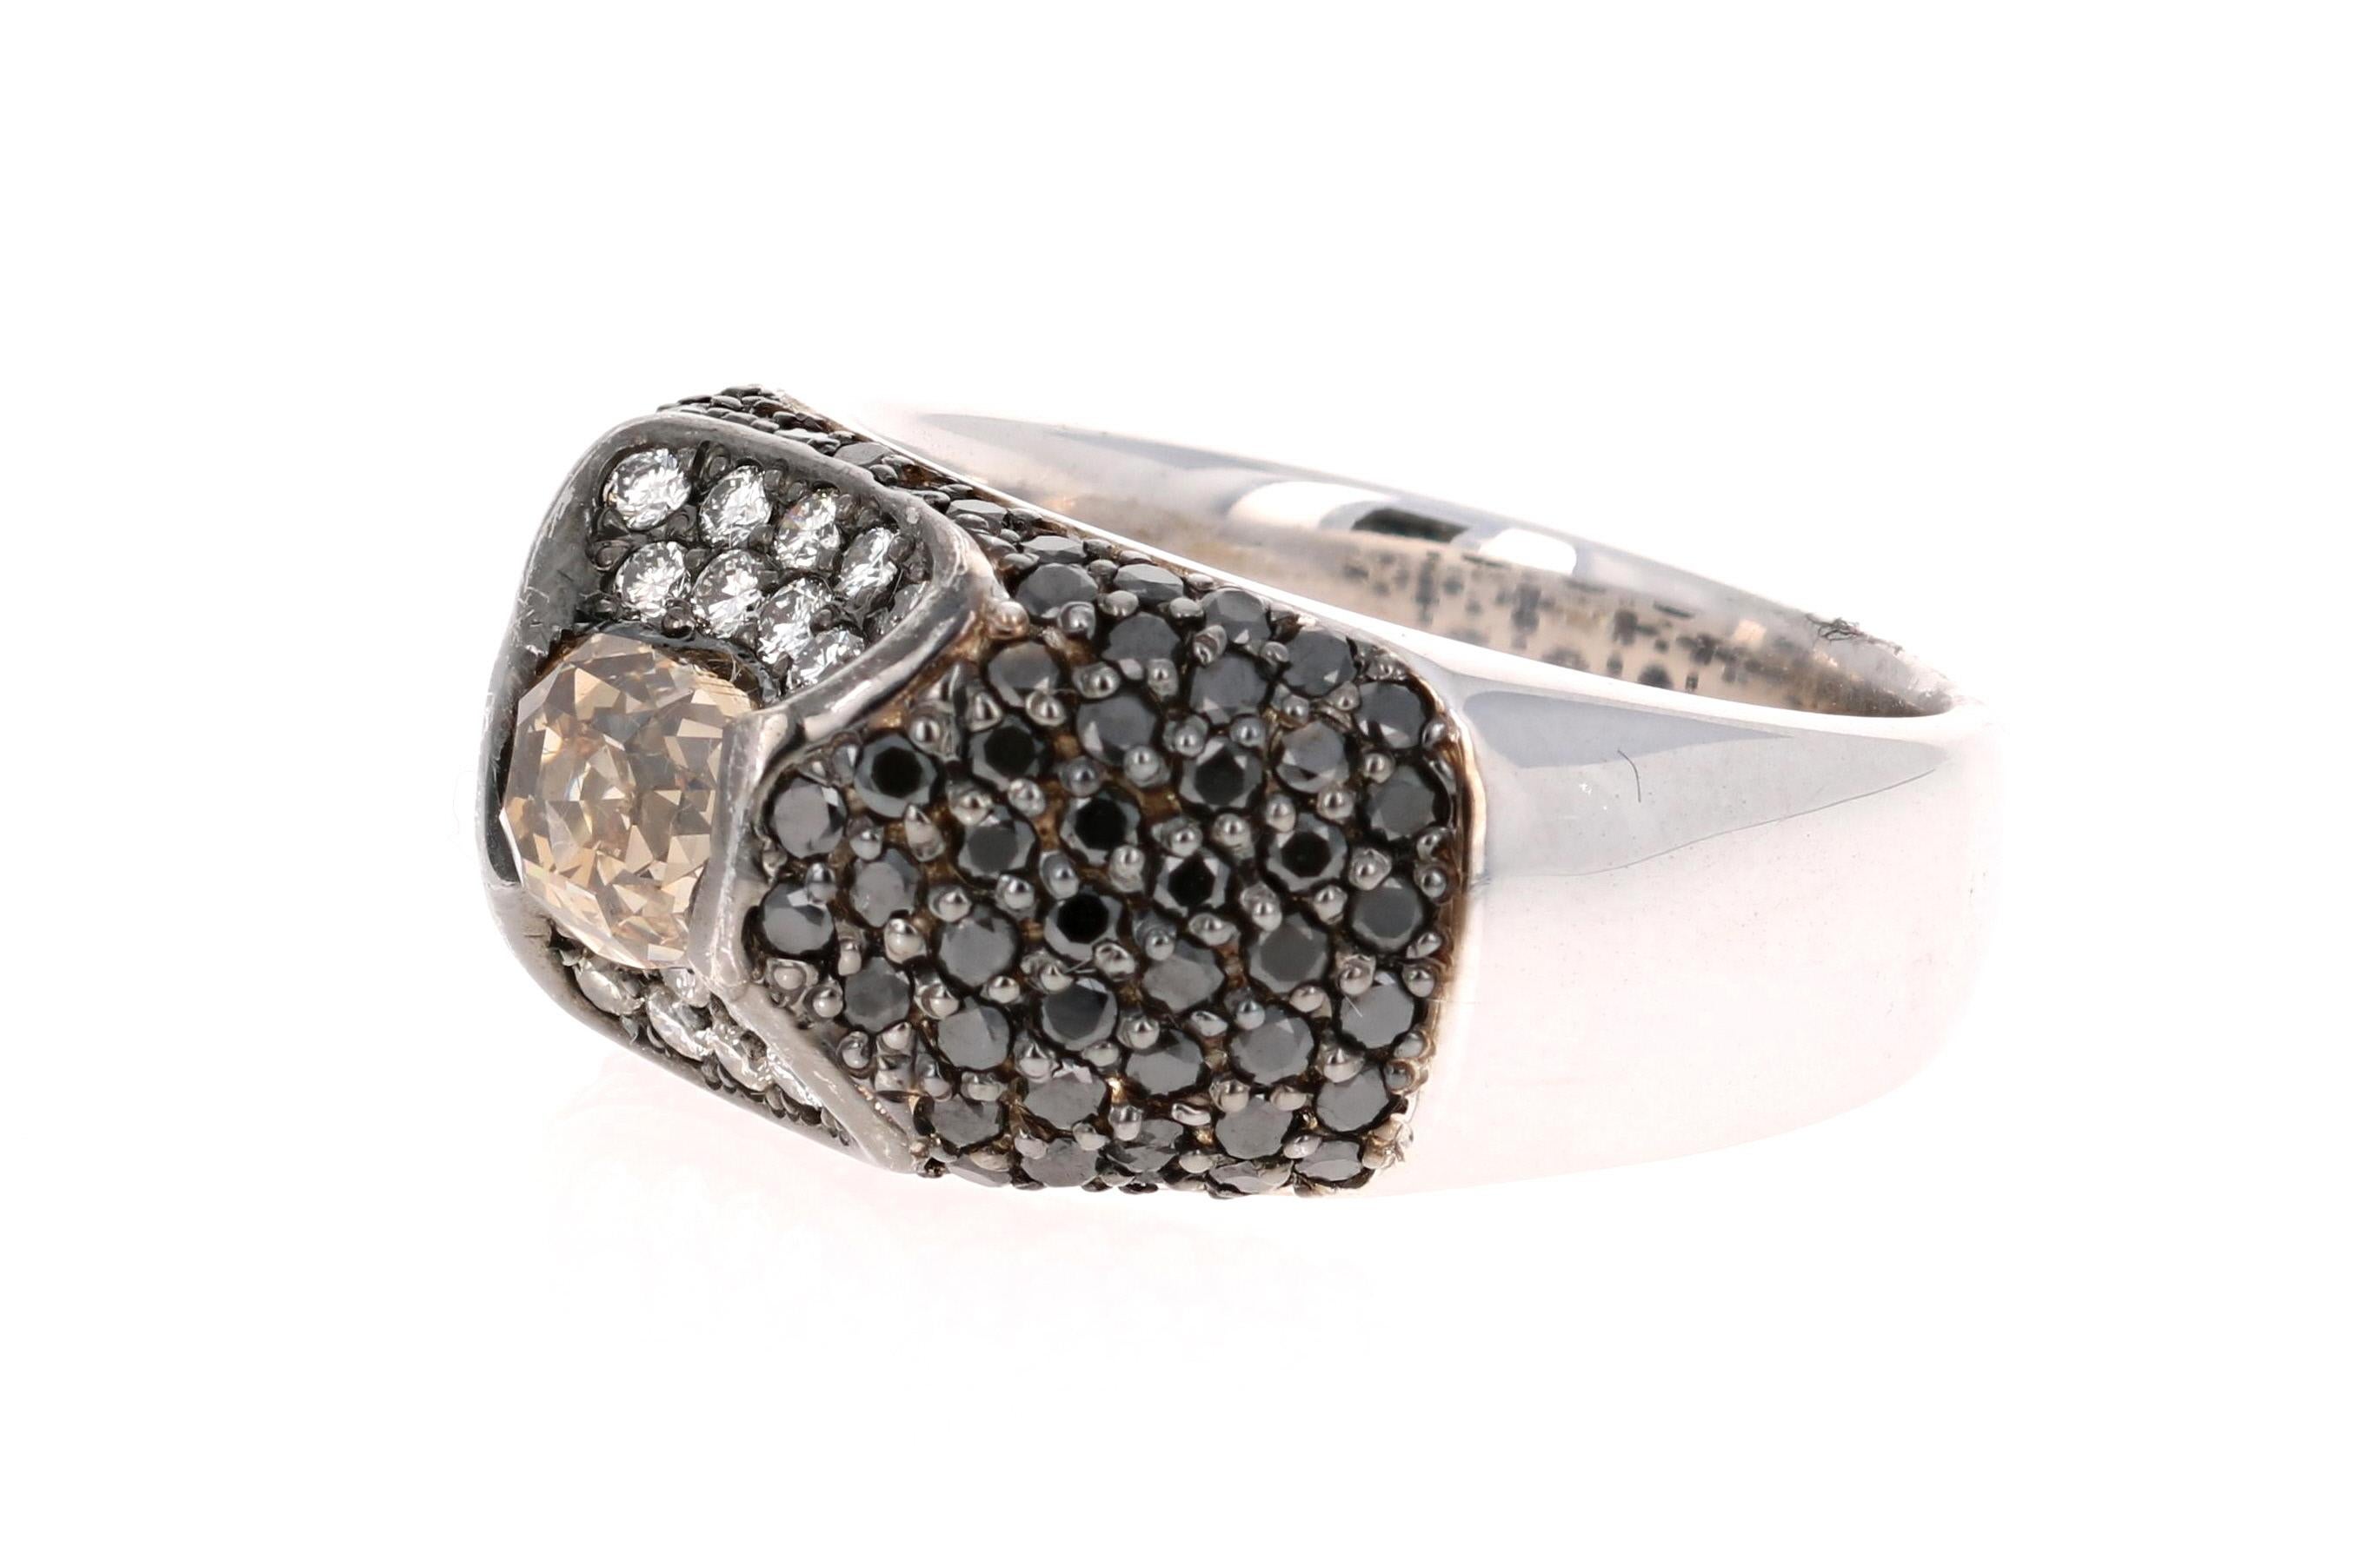 A unique Black Diamond and Natural Fancy-Colored Diamond ring.  This ring has 1 Oval Cut Natural Fancy-Colored Diamond floating in the center of the ring that weighs 1.27 carats and is surrounded by 18 Round Cut Diamonds that weigh 0.31 carats and